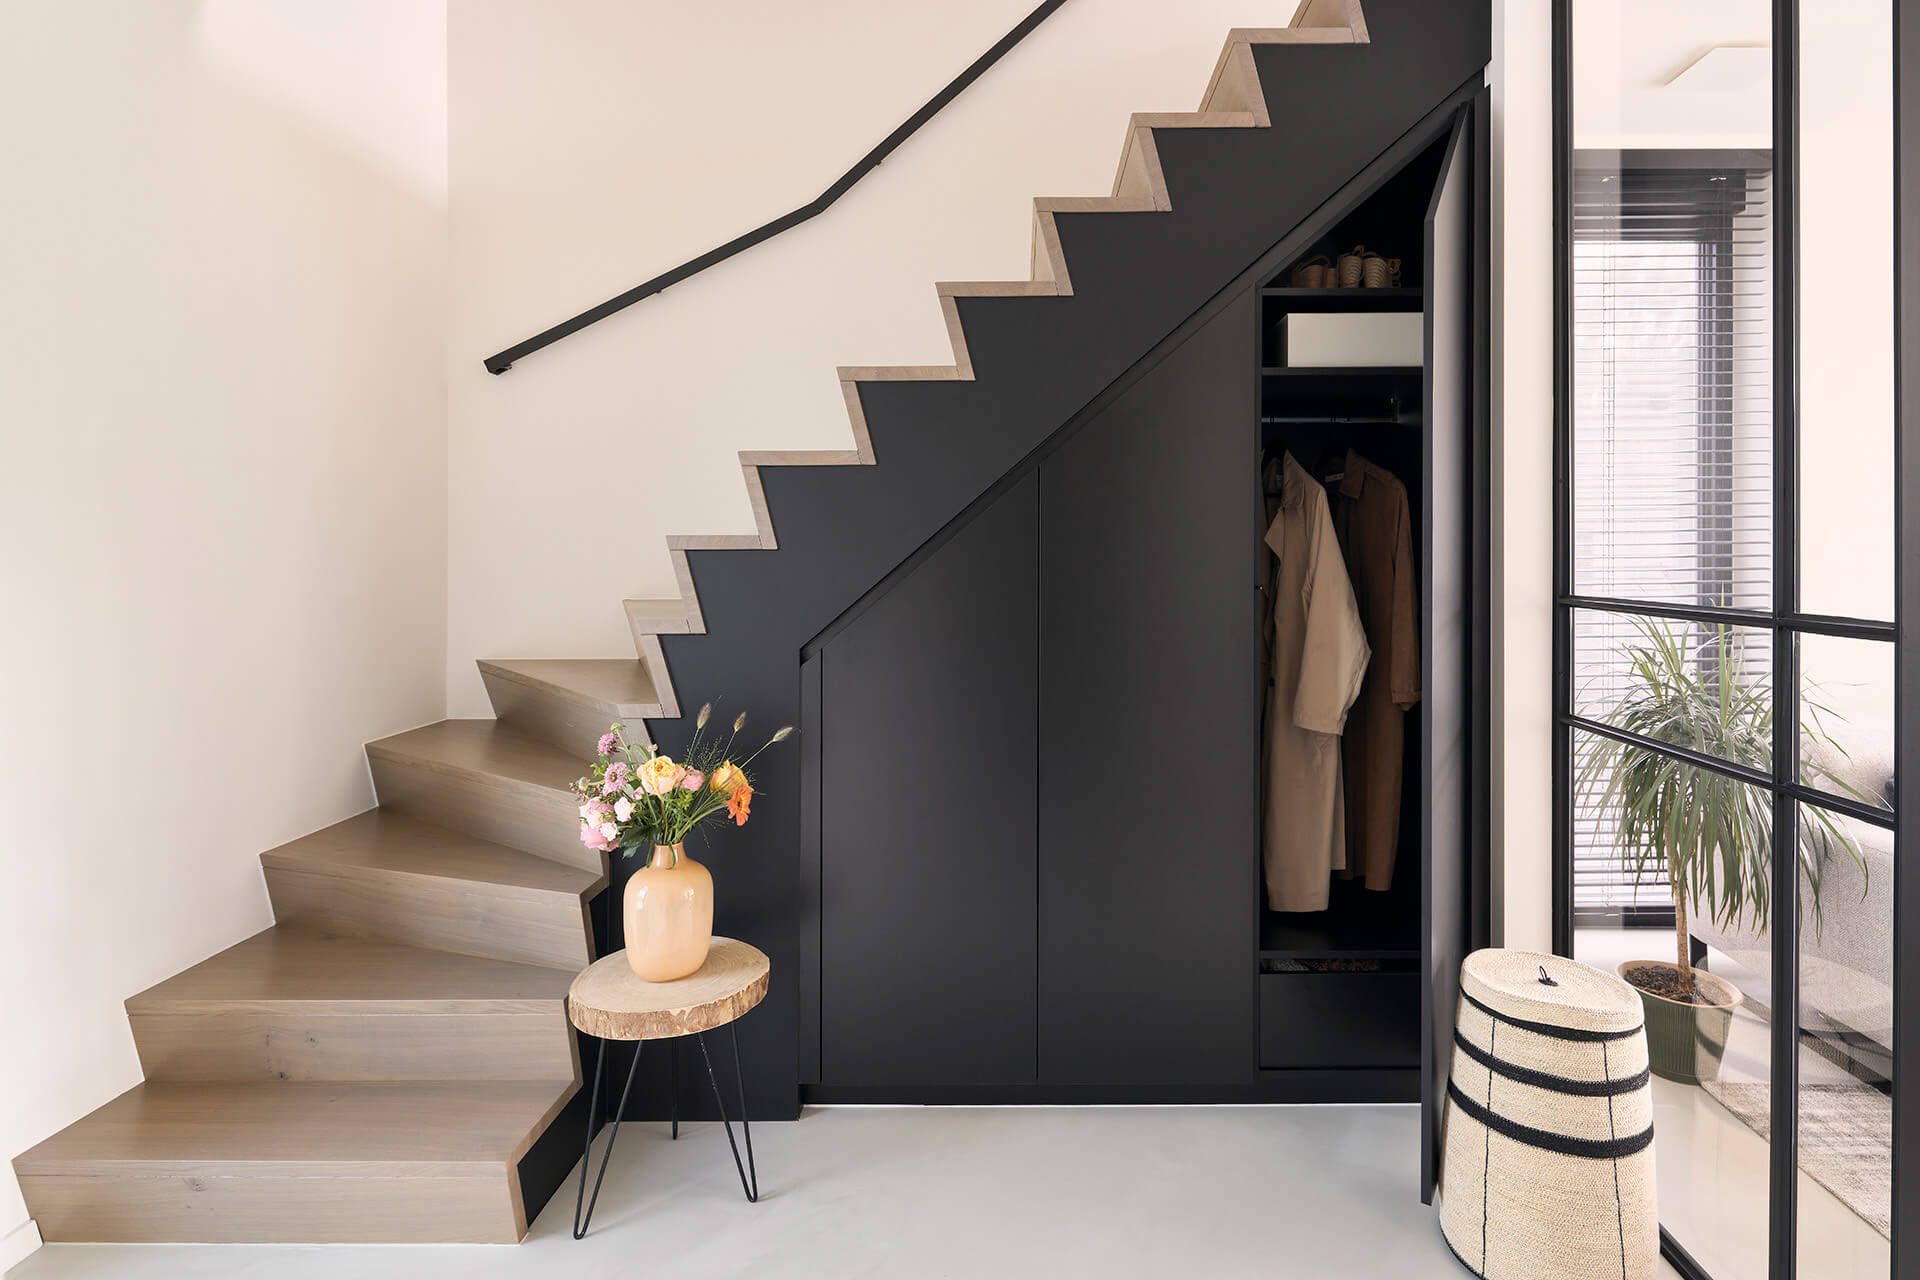 Black custom cabinet under a staircase in an entryway.